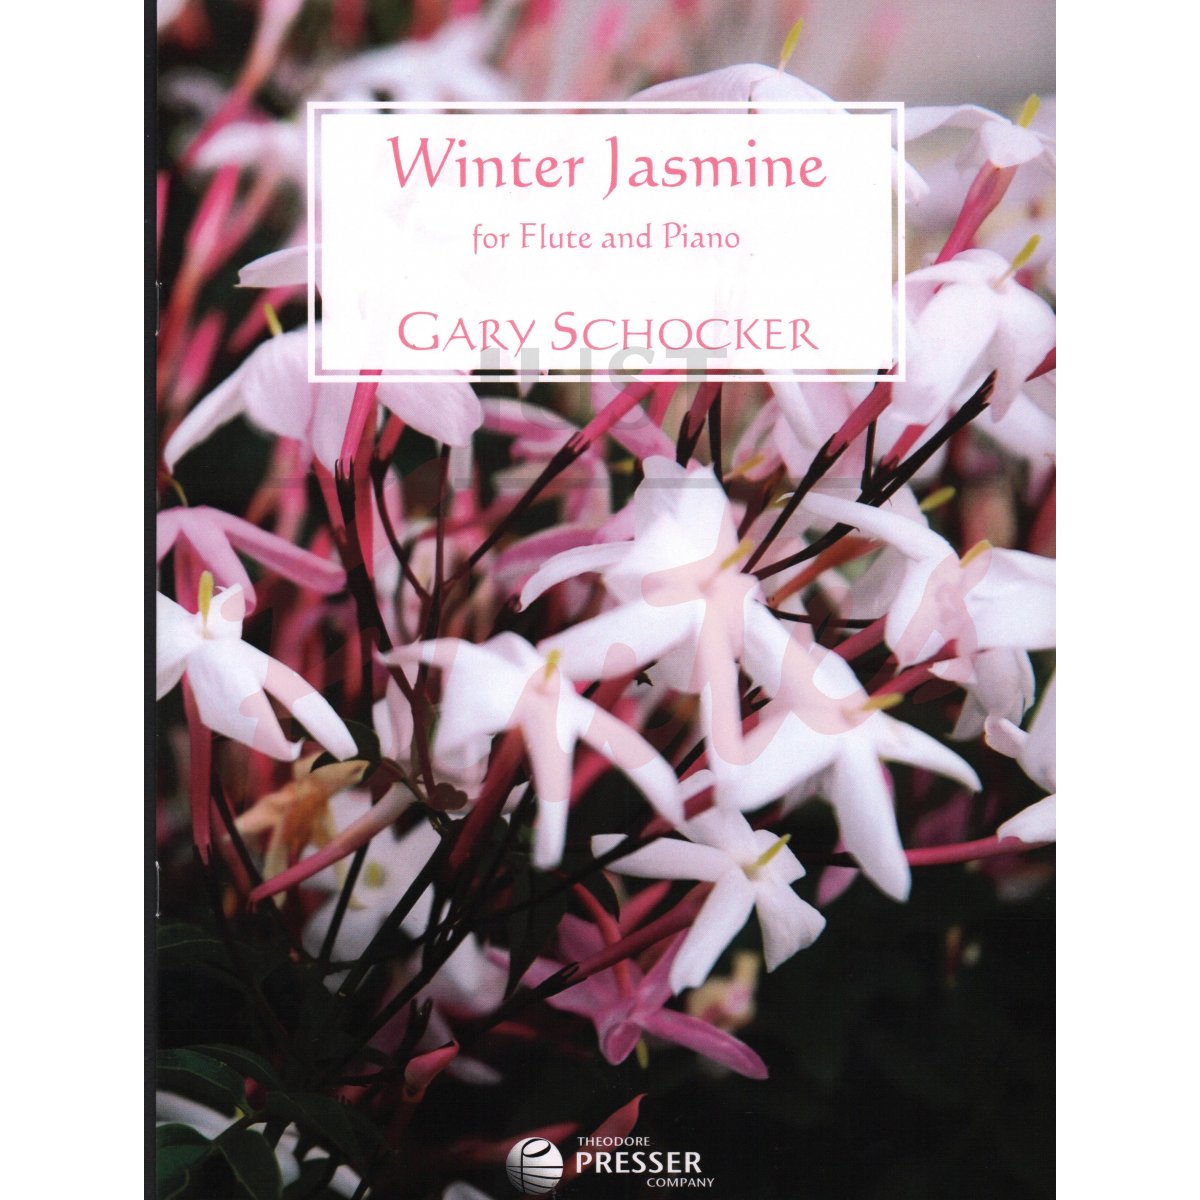 Winter Jasmine for Flute and Piano